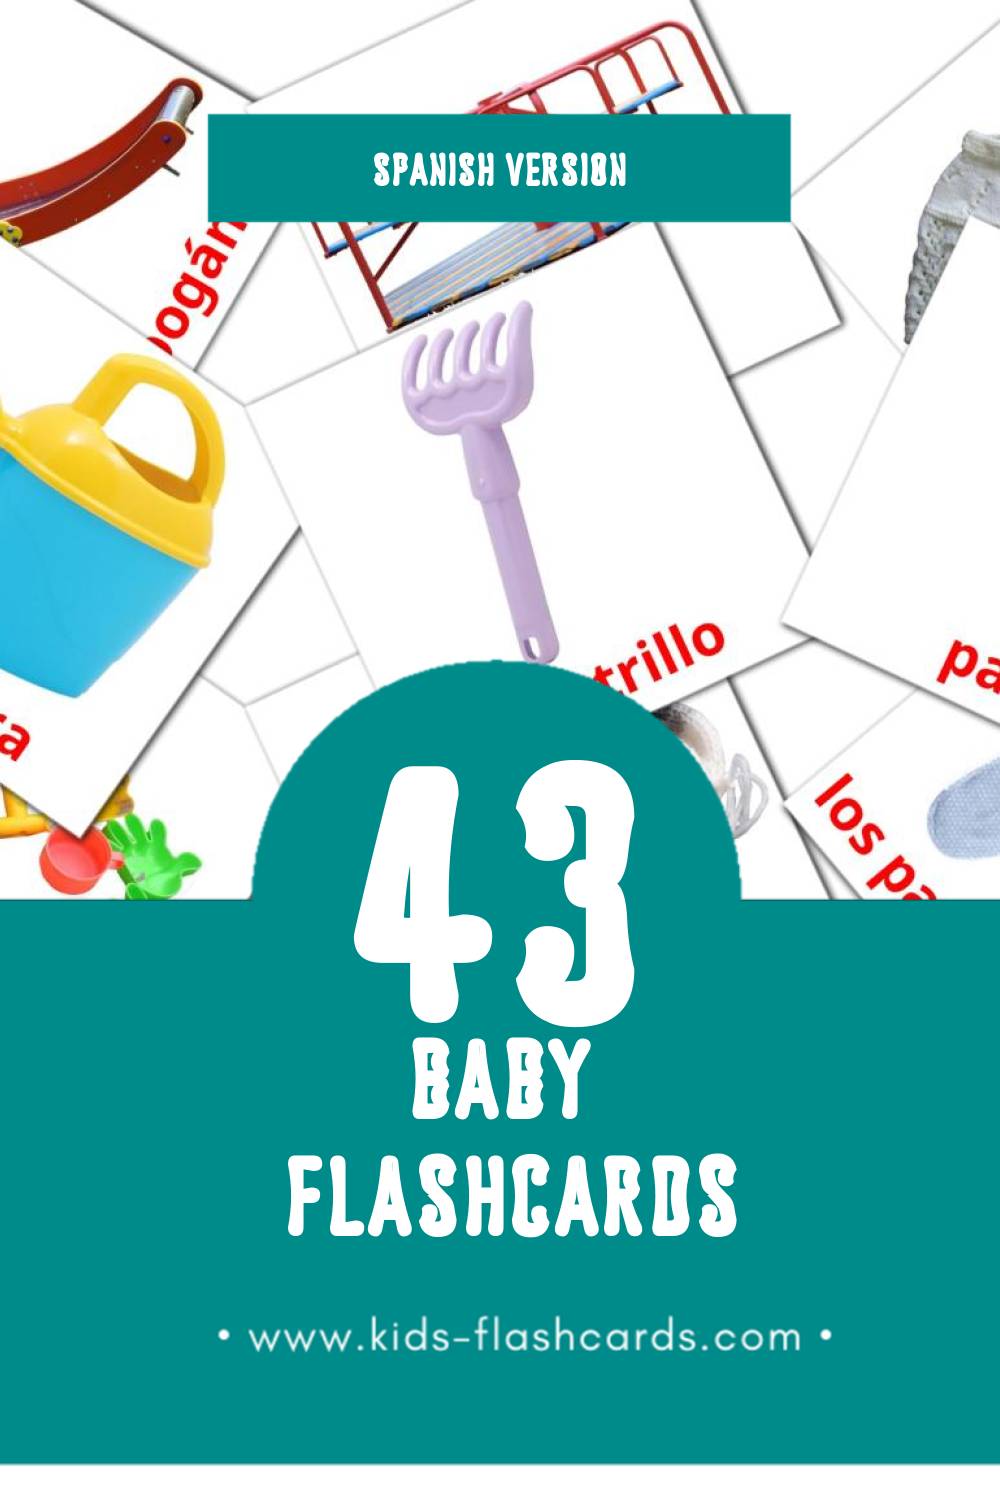 Visual Bebé Flashcards for Toddlers (43 cards in Spanish)